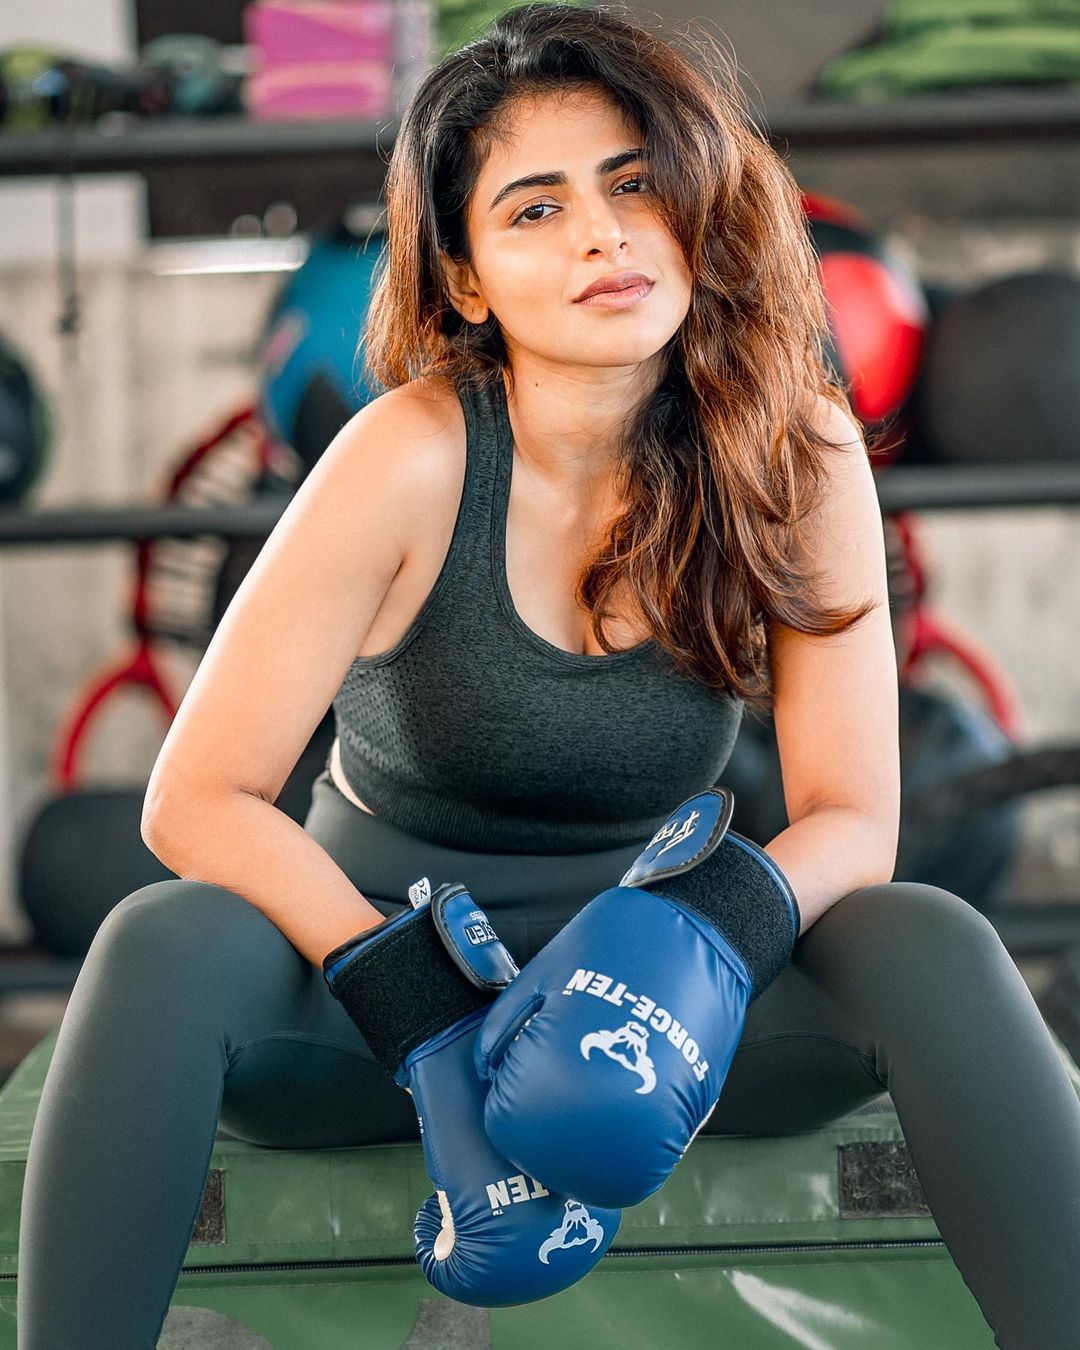 iswarya menon hot photos post work out getting trending